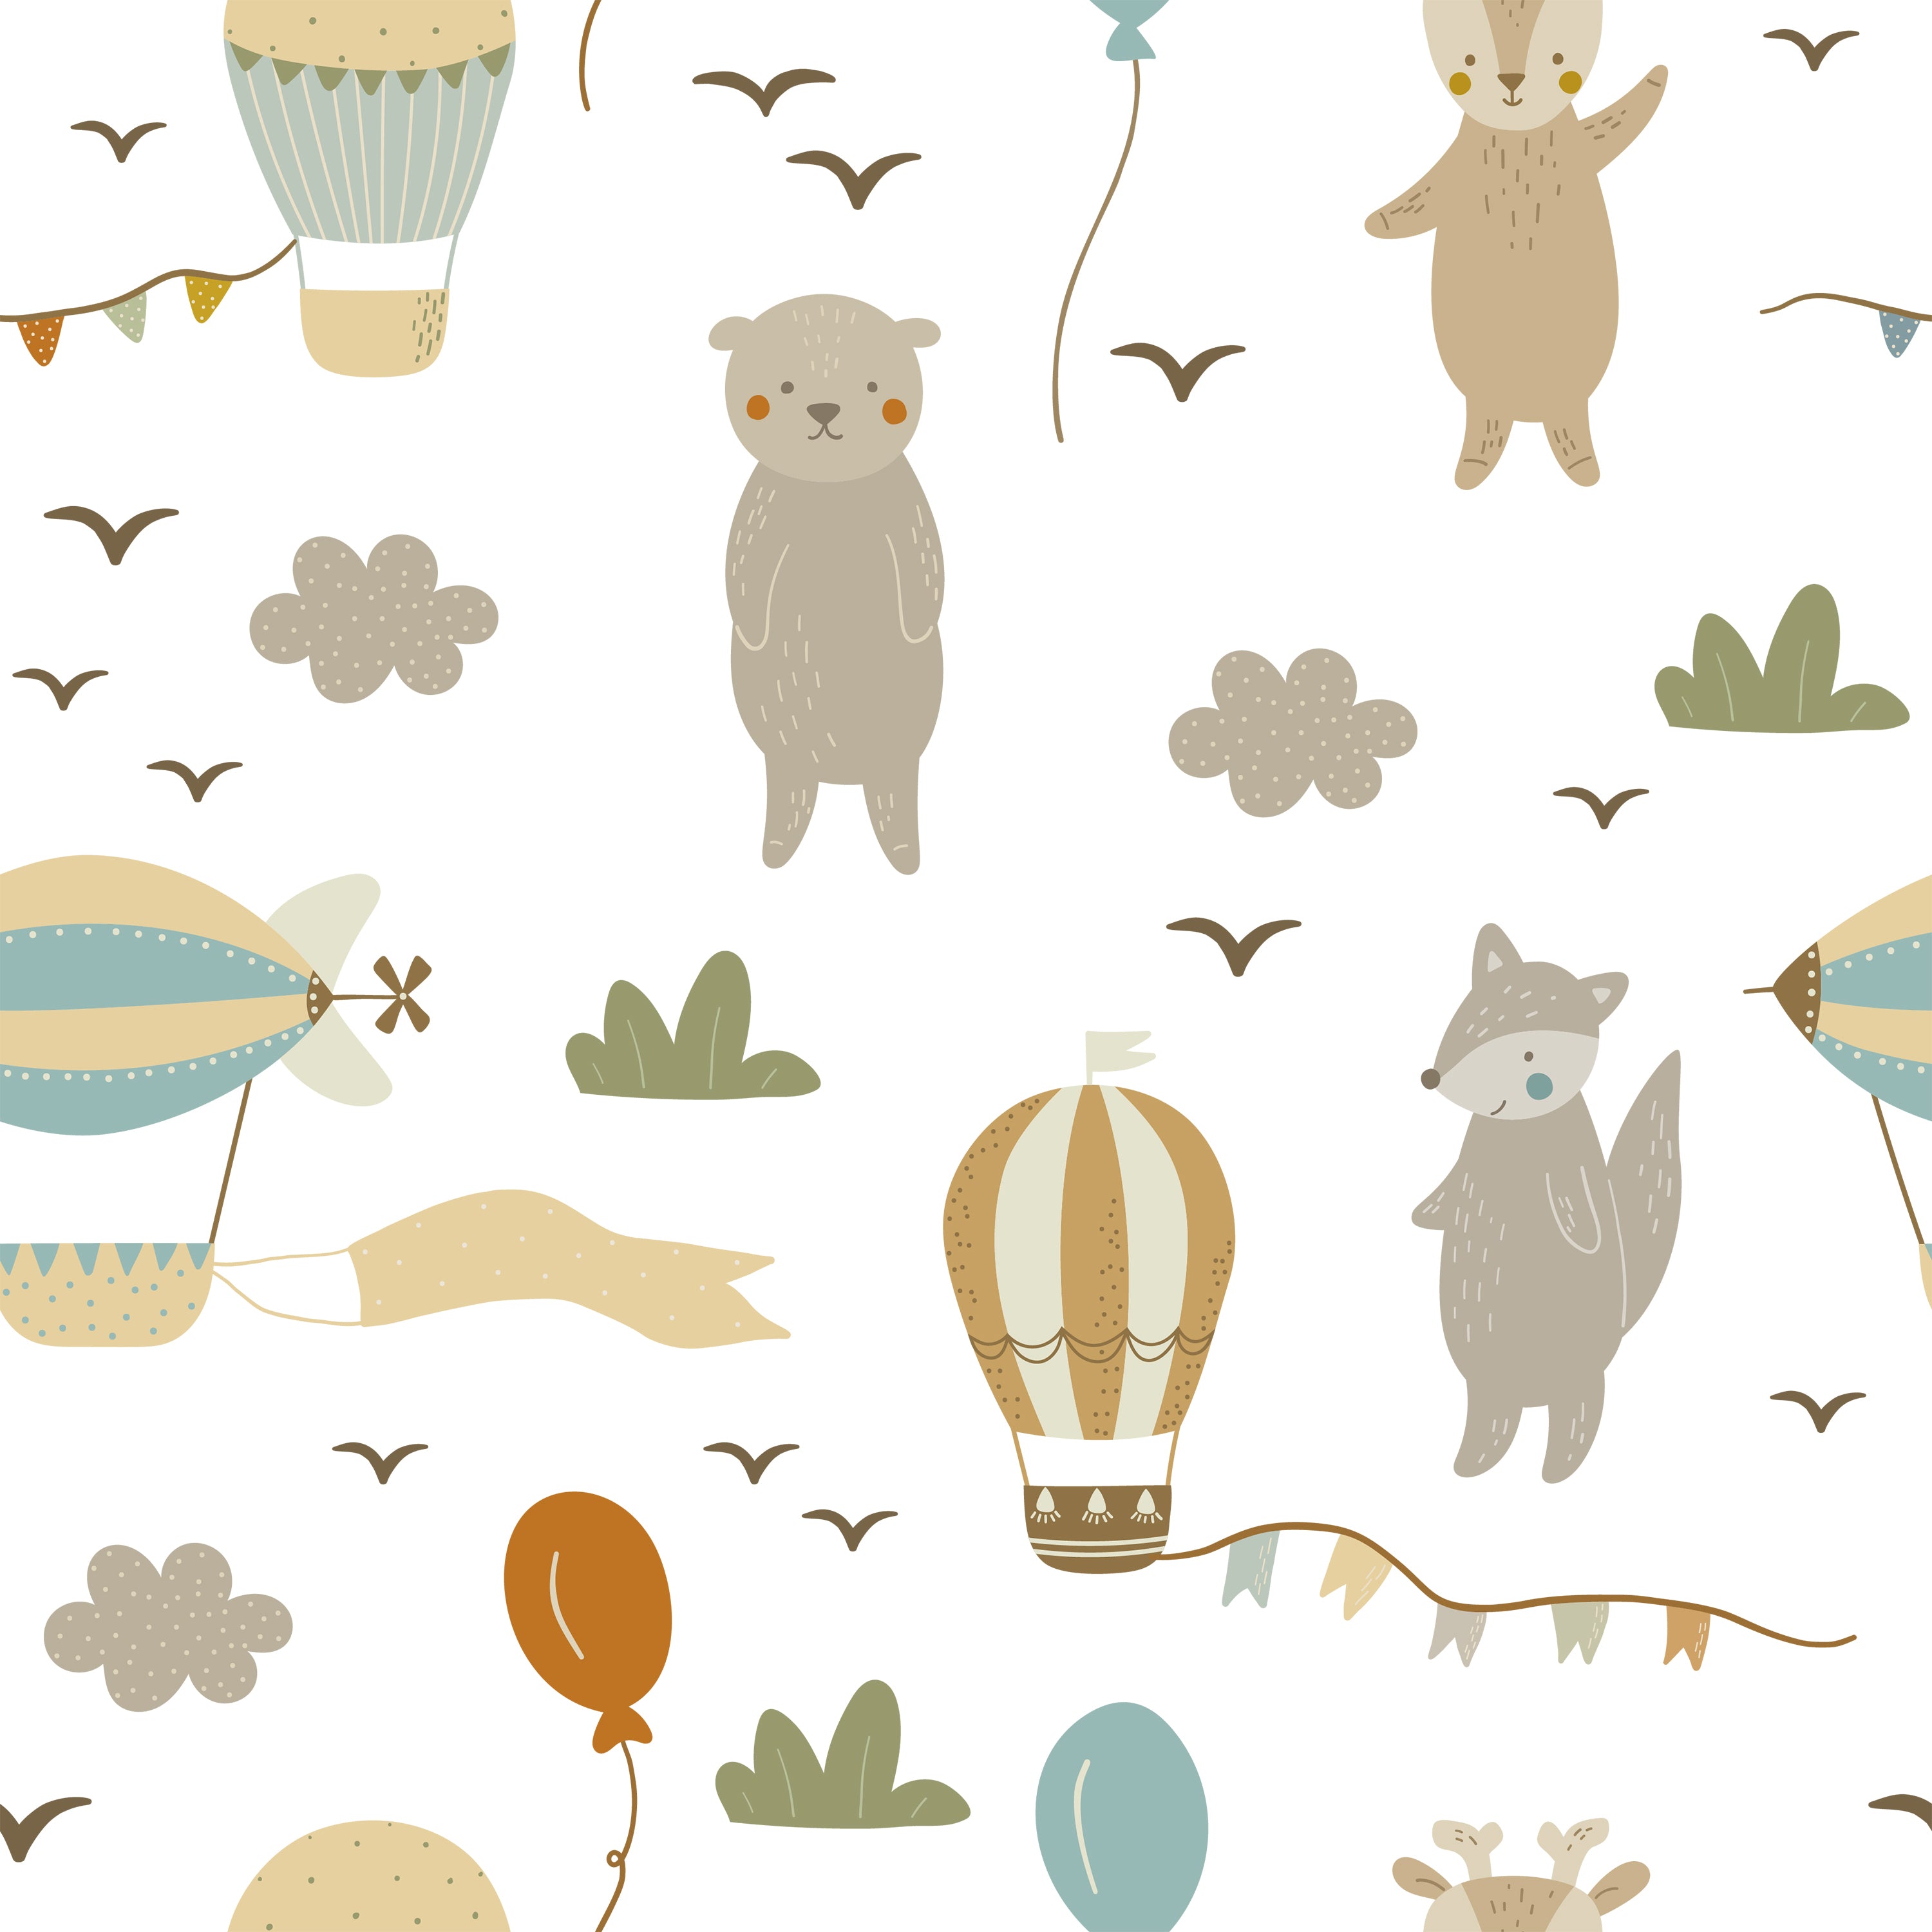 Detailed close-up of Hot Air Balloon Wallpaper, featuring whimsical hot air balloons, adorable animals like bears and foxes, and playful elements like balloons and clouds on a light, neutral background, creating a dreamy and adventurous scene.